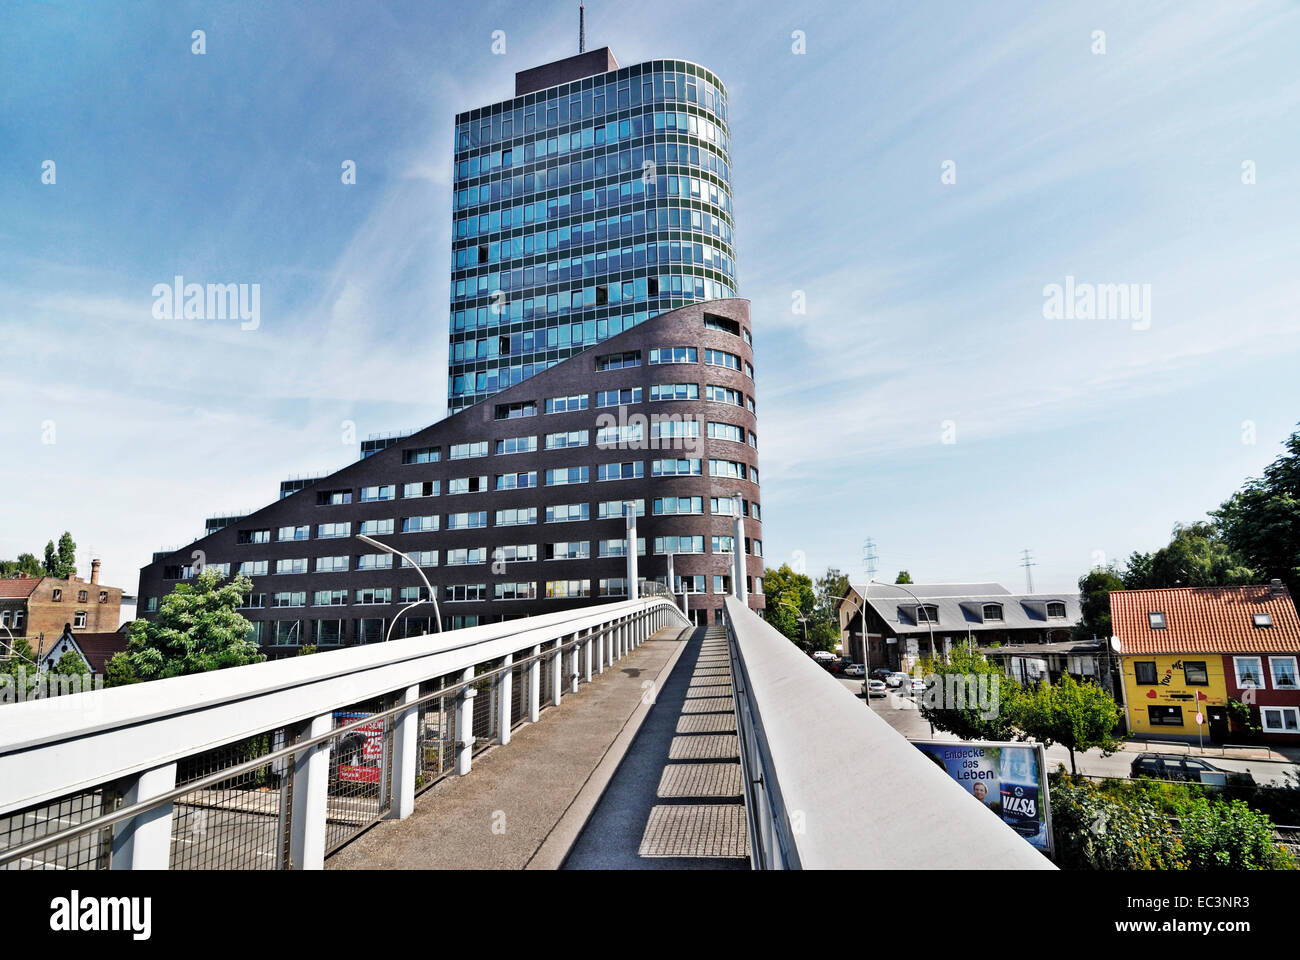 Channel Tower In Harburg Hamburg Germany Stock Photo Royalty Free